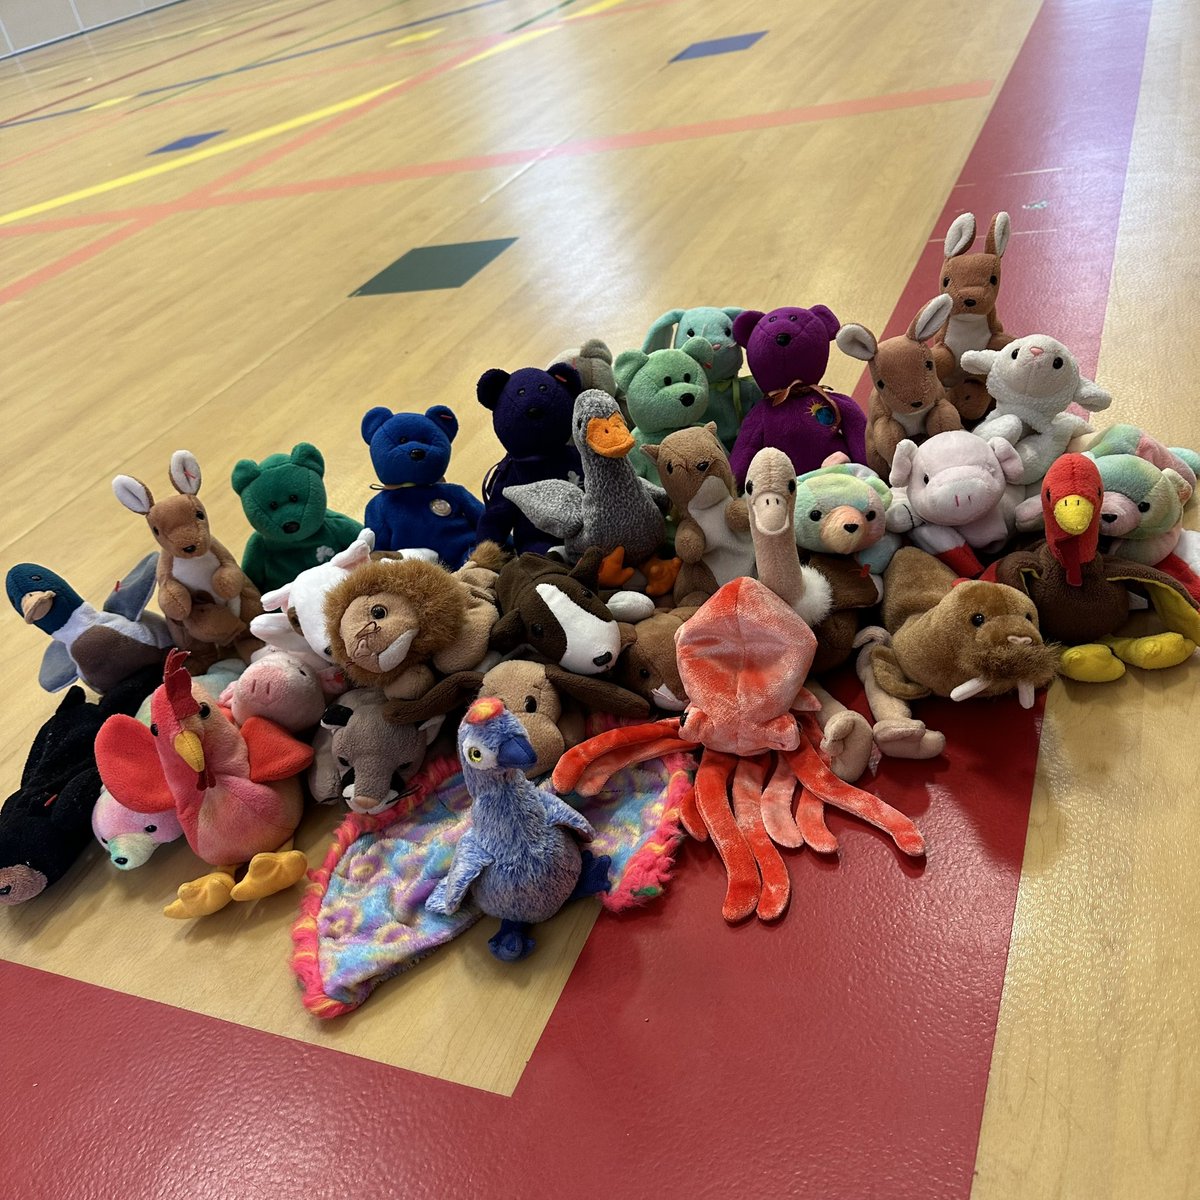 Had a great response from our school community after asking for old Beanie Baby donations! These help add to our fun of throwing, catching, tagging, balancing, parachute games and more! And most importantly, FREE equipment! #PhysEd